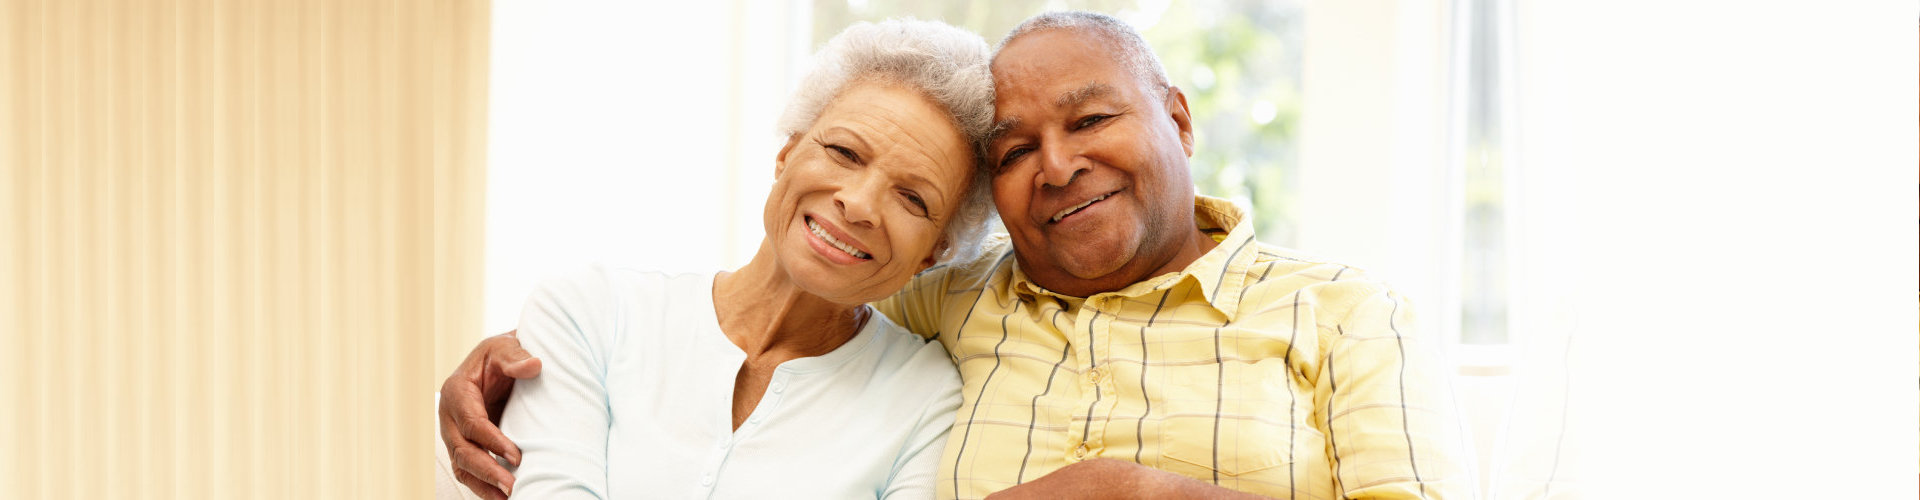 elderly couple smiling at the camera